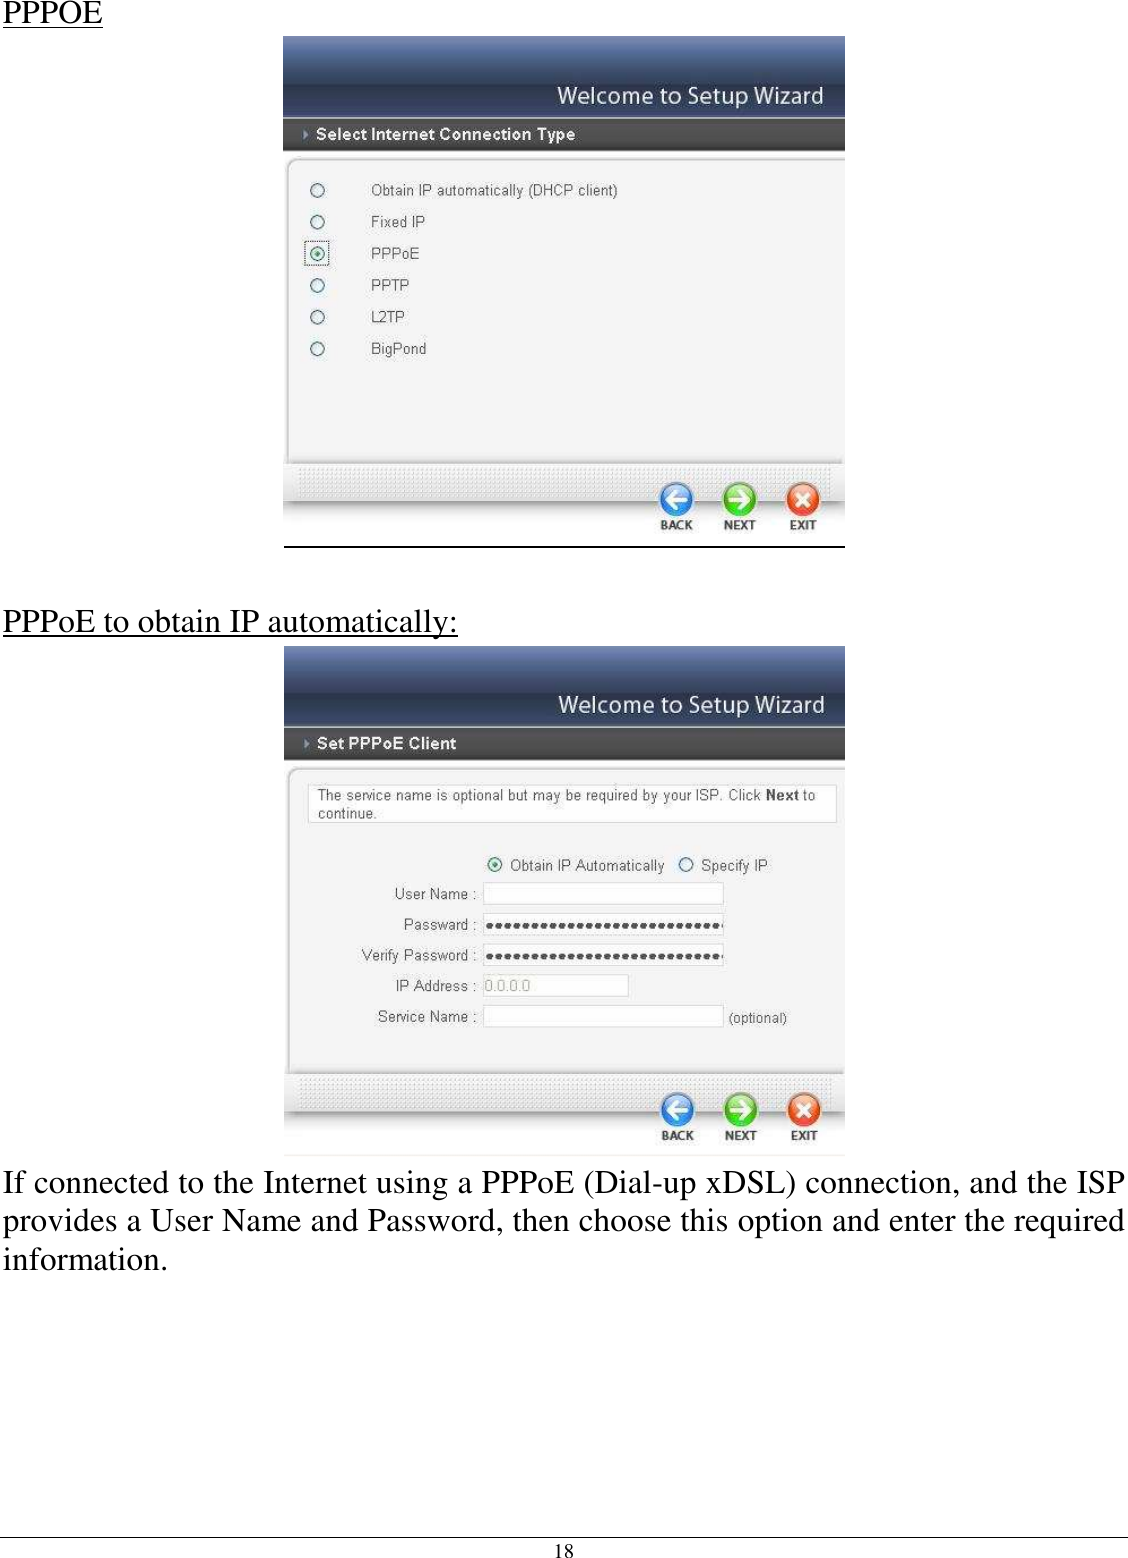 18 PPPOE   PPPoE to obtain IP automatically:  If connected to the Internet using a PPPoE (Dial-up xDSL) connection, and the ISP provides a User Name and Password, then choose this option and enter the required information.  